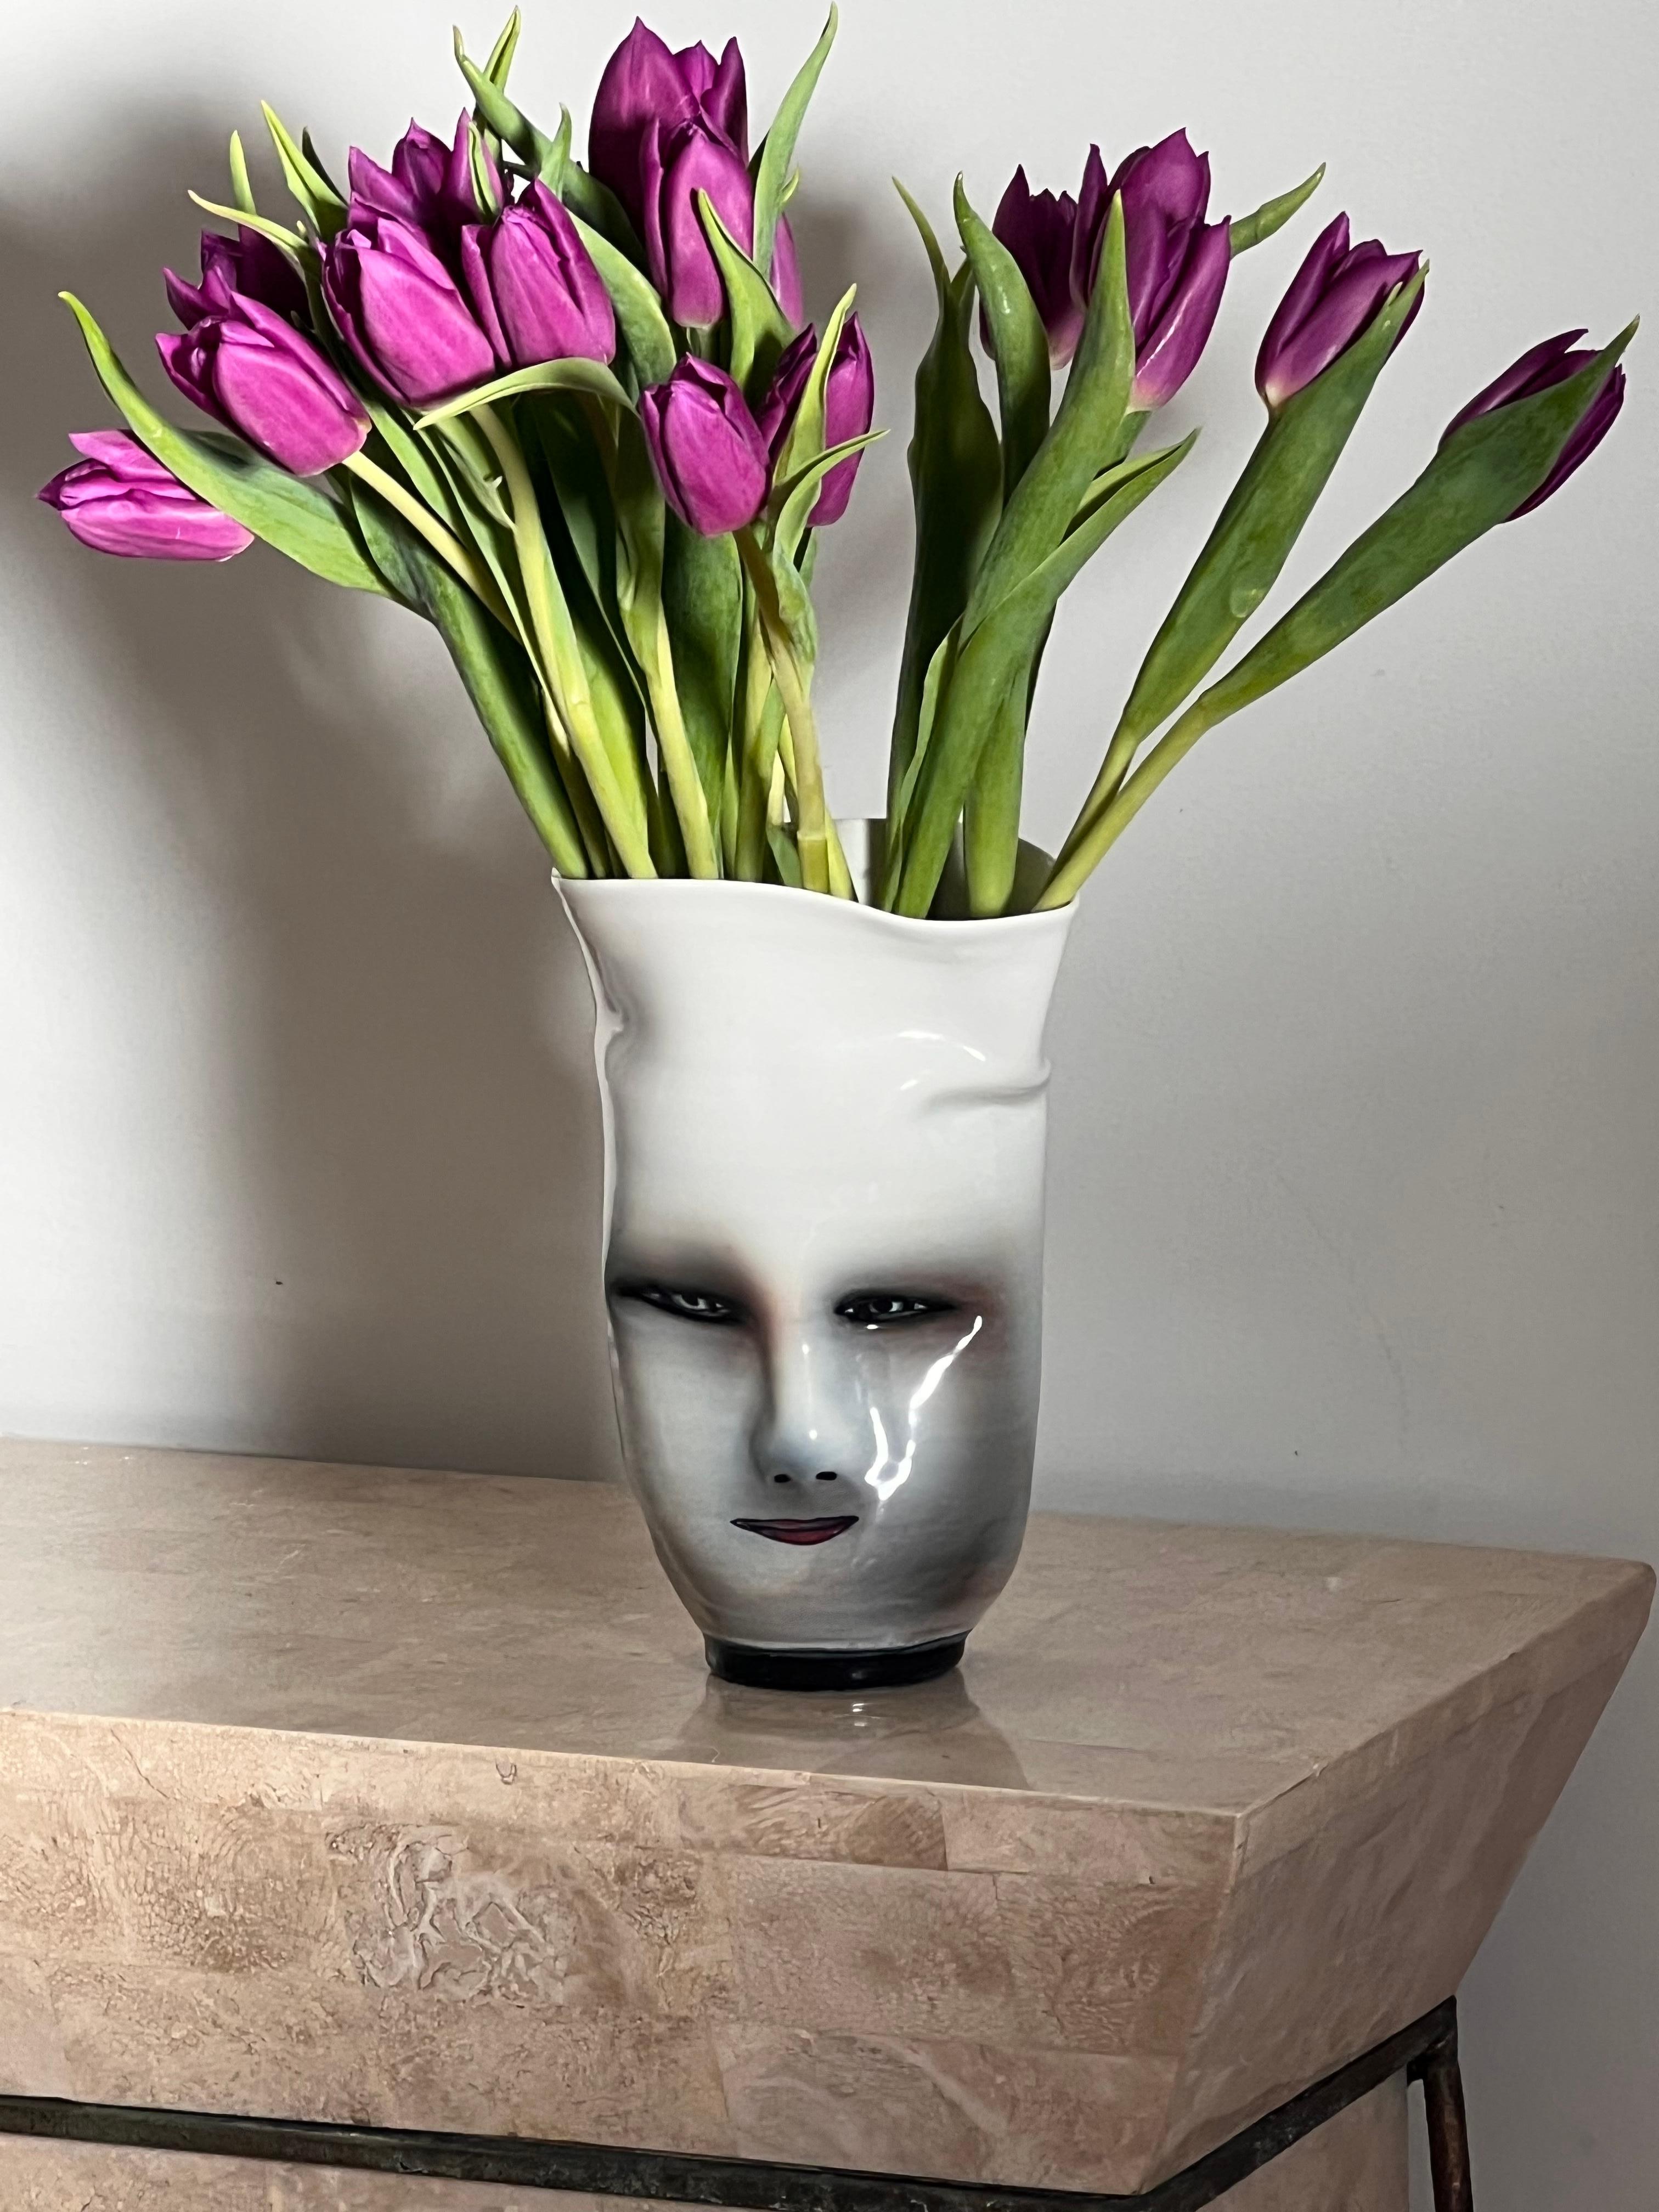 A very unique and somewhat eerie postmodern ceramic face vase by artist Bing Gleitsman, 1996. Painted and glazed, and signed and dated. Tones of violet, shade, and blush. Pick up in LA or worldwide shipping available.
Dimensions: 
5” W x 3.5” D x